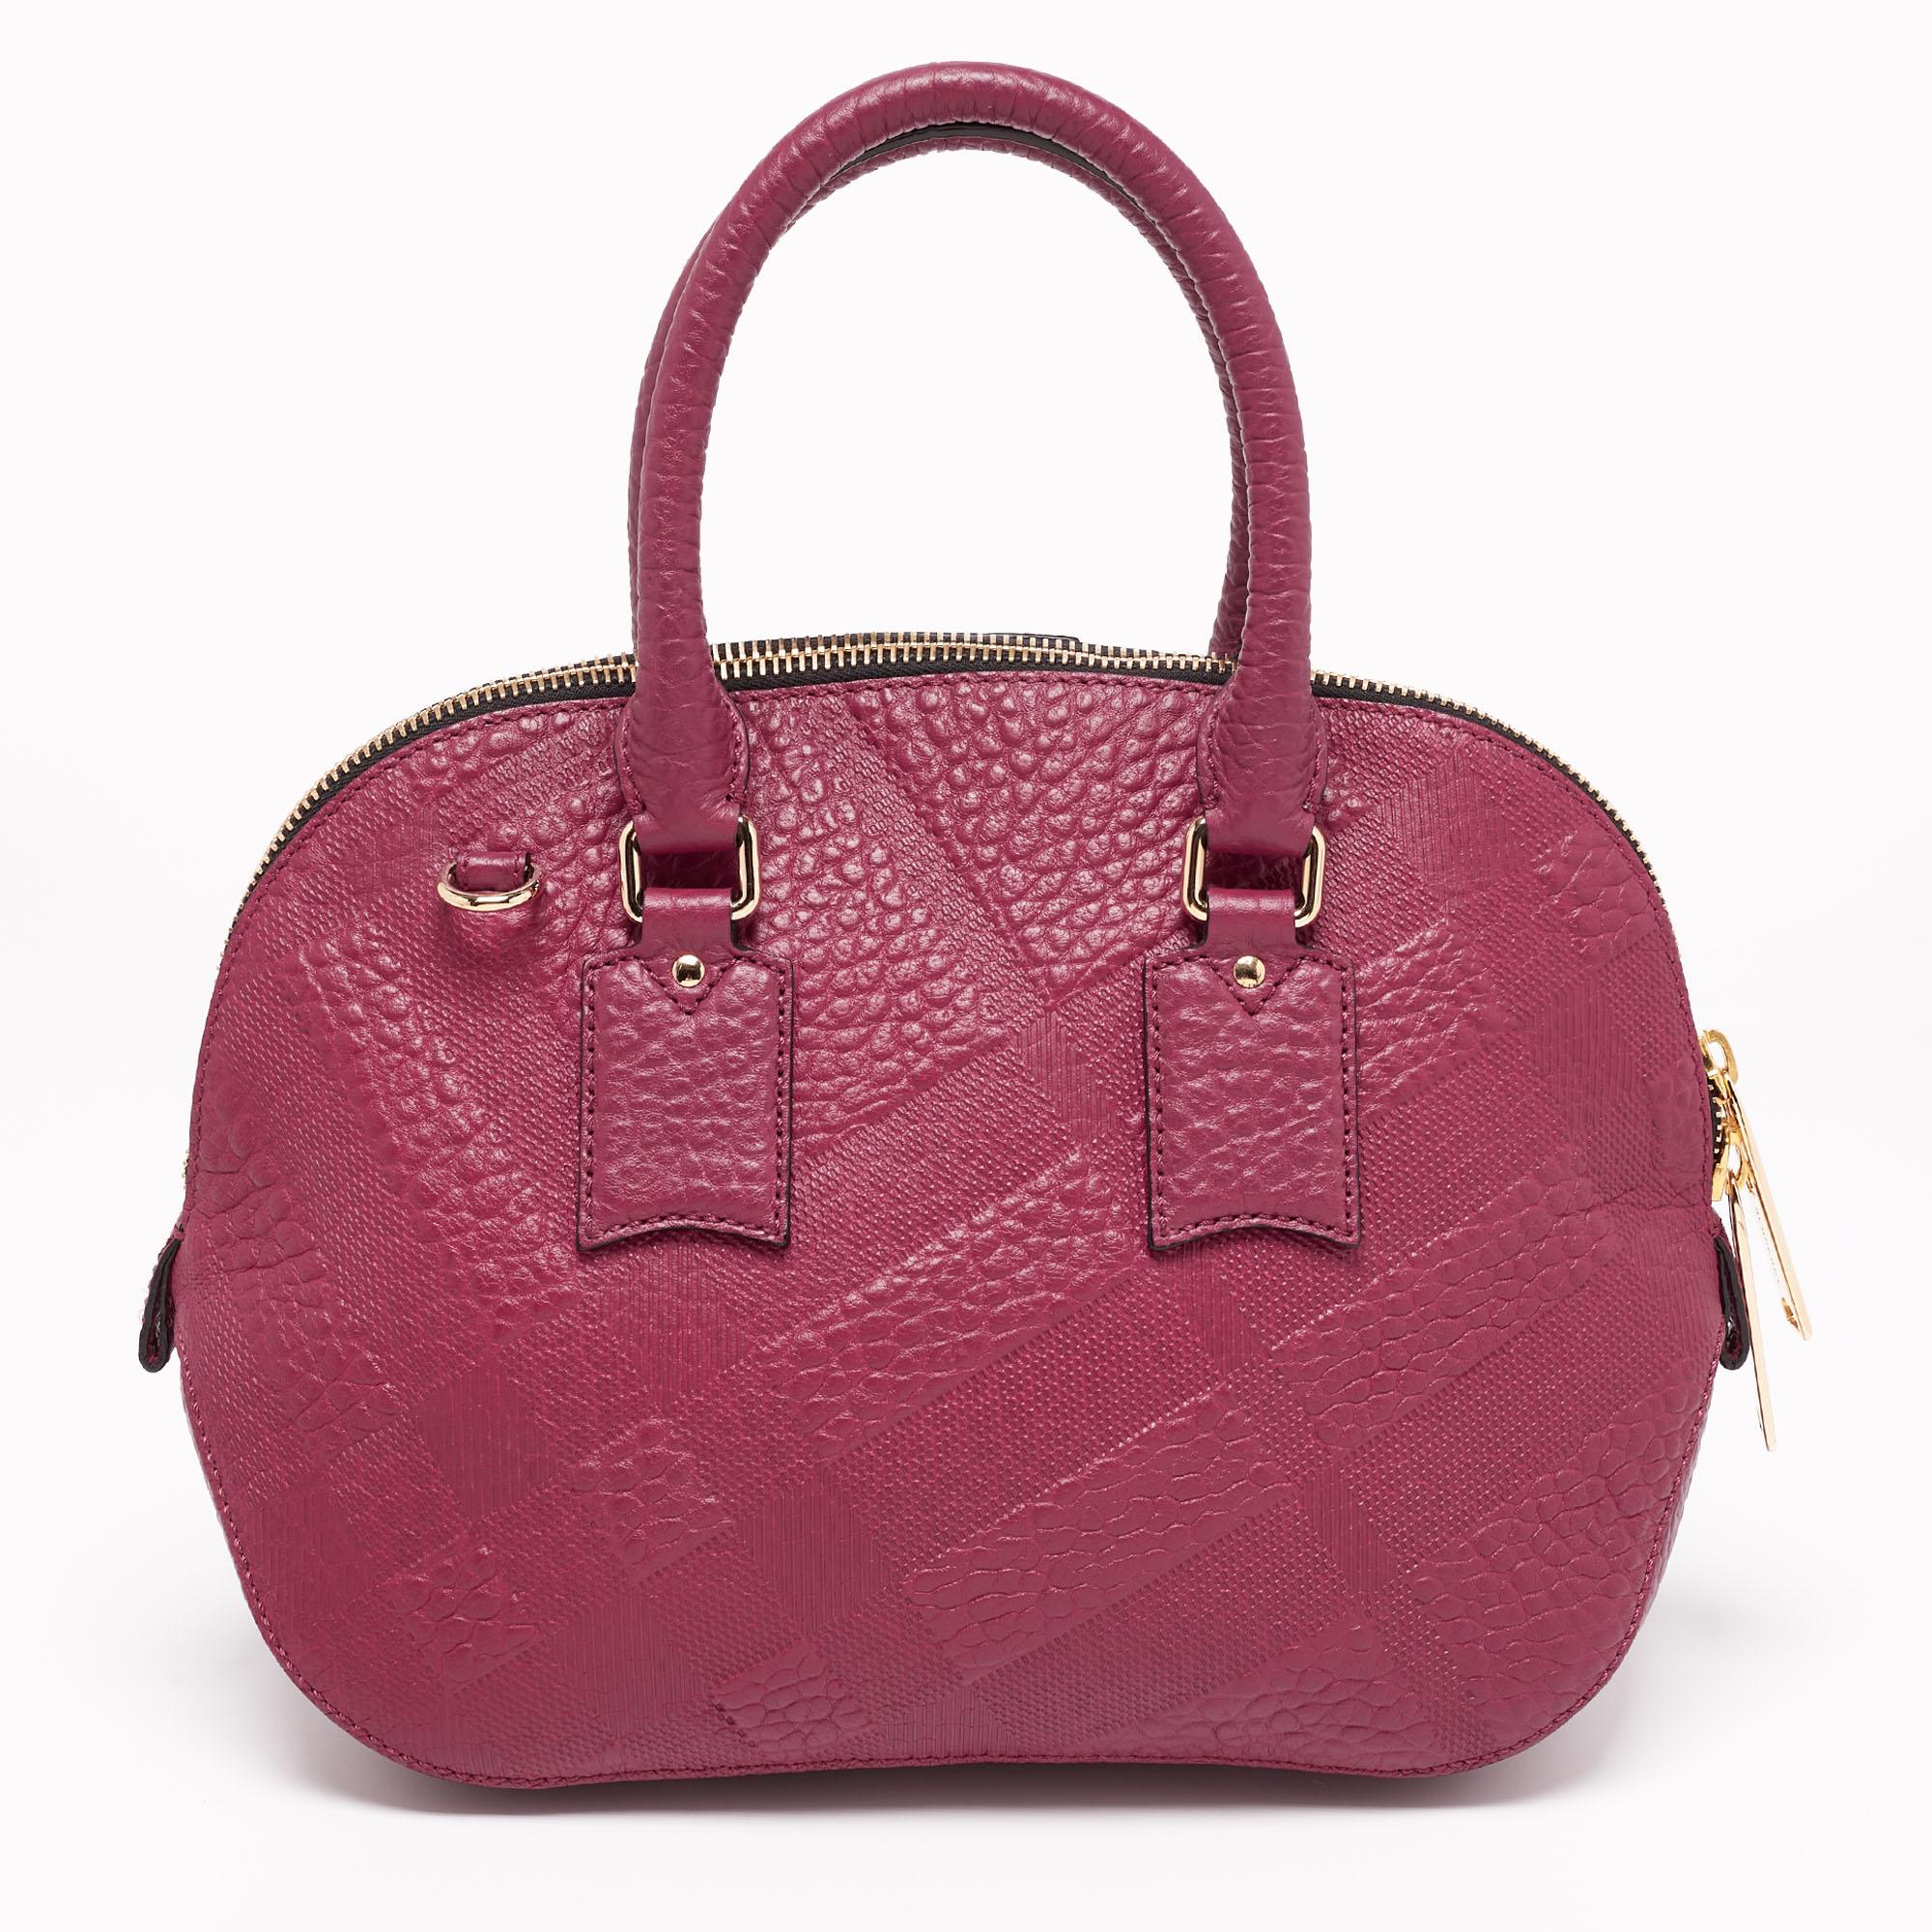 Expertly crafted and skillfully designed, this Burberry creation is a must-have in every bag collection. It is made from burgundy leather. Features like the two comfortable handles, detachable shoulder strap, and spacious fabric interior make it a